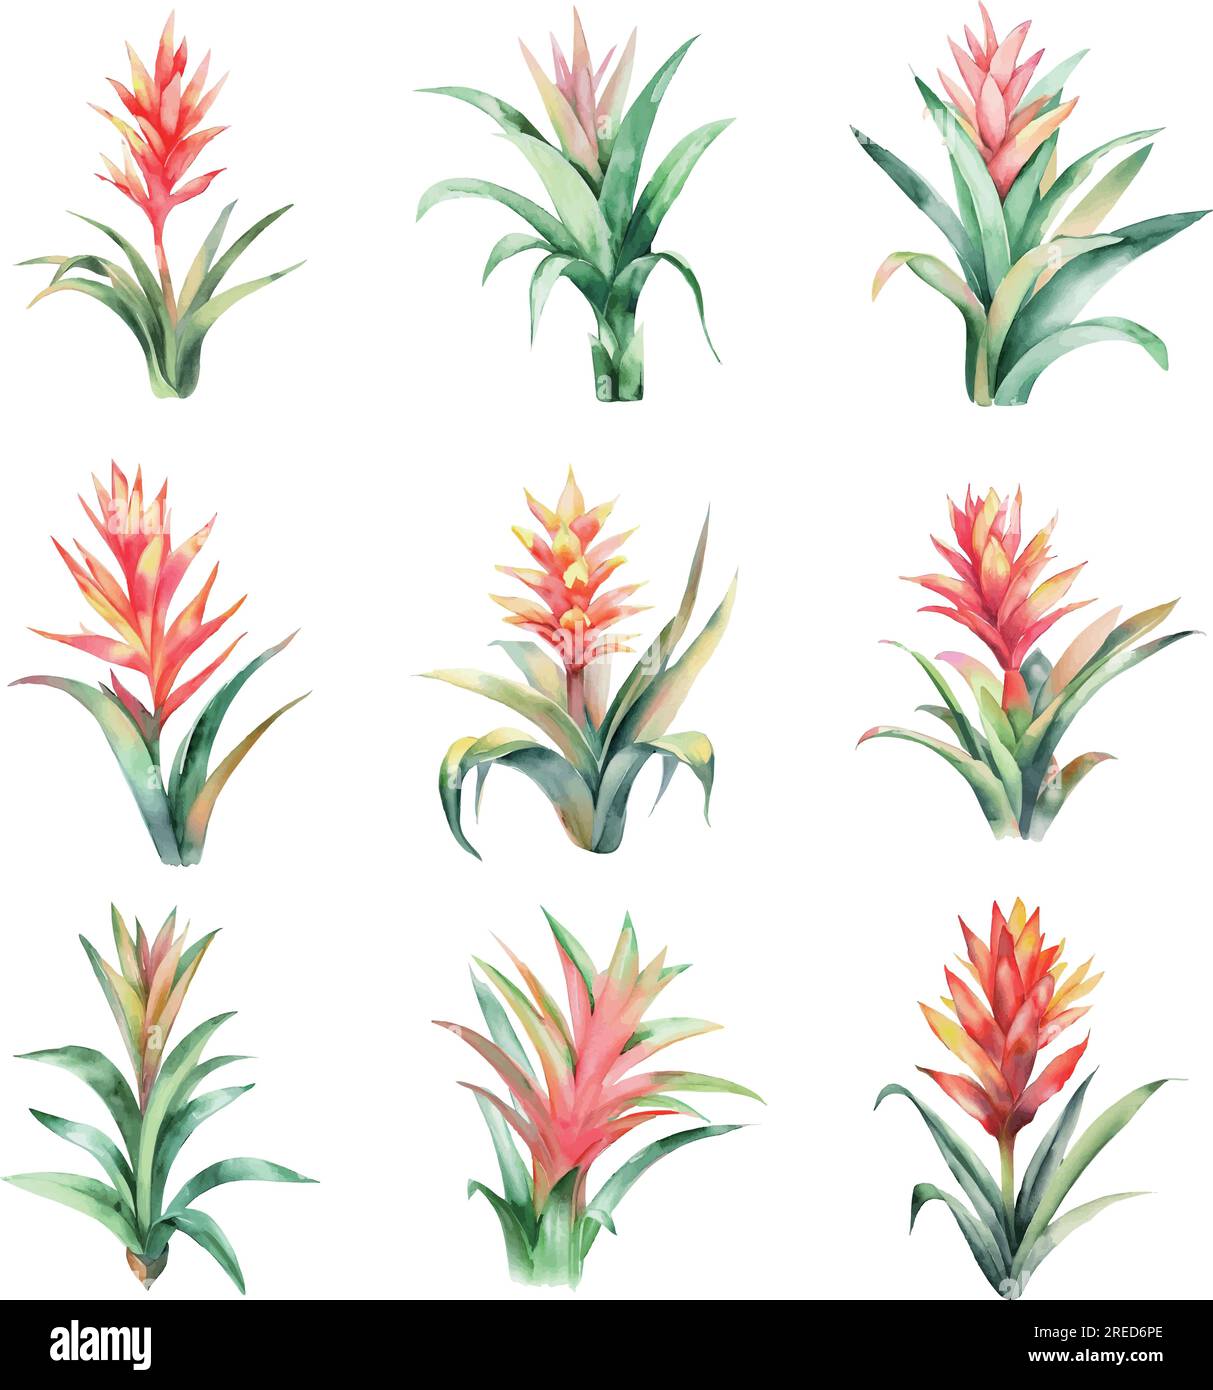 Guzmania.Set of watercolor bromeliad tropical flowers. Hand drawn illustration isolated on white background Stock Vector